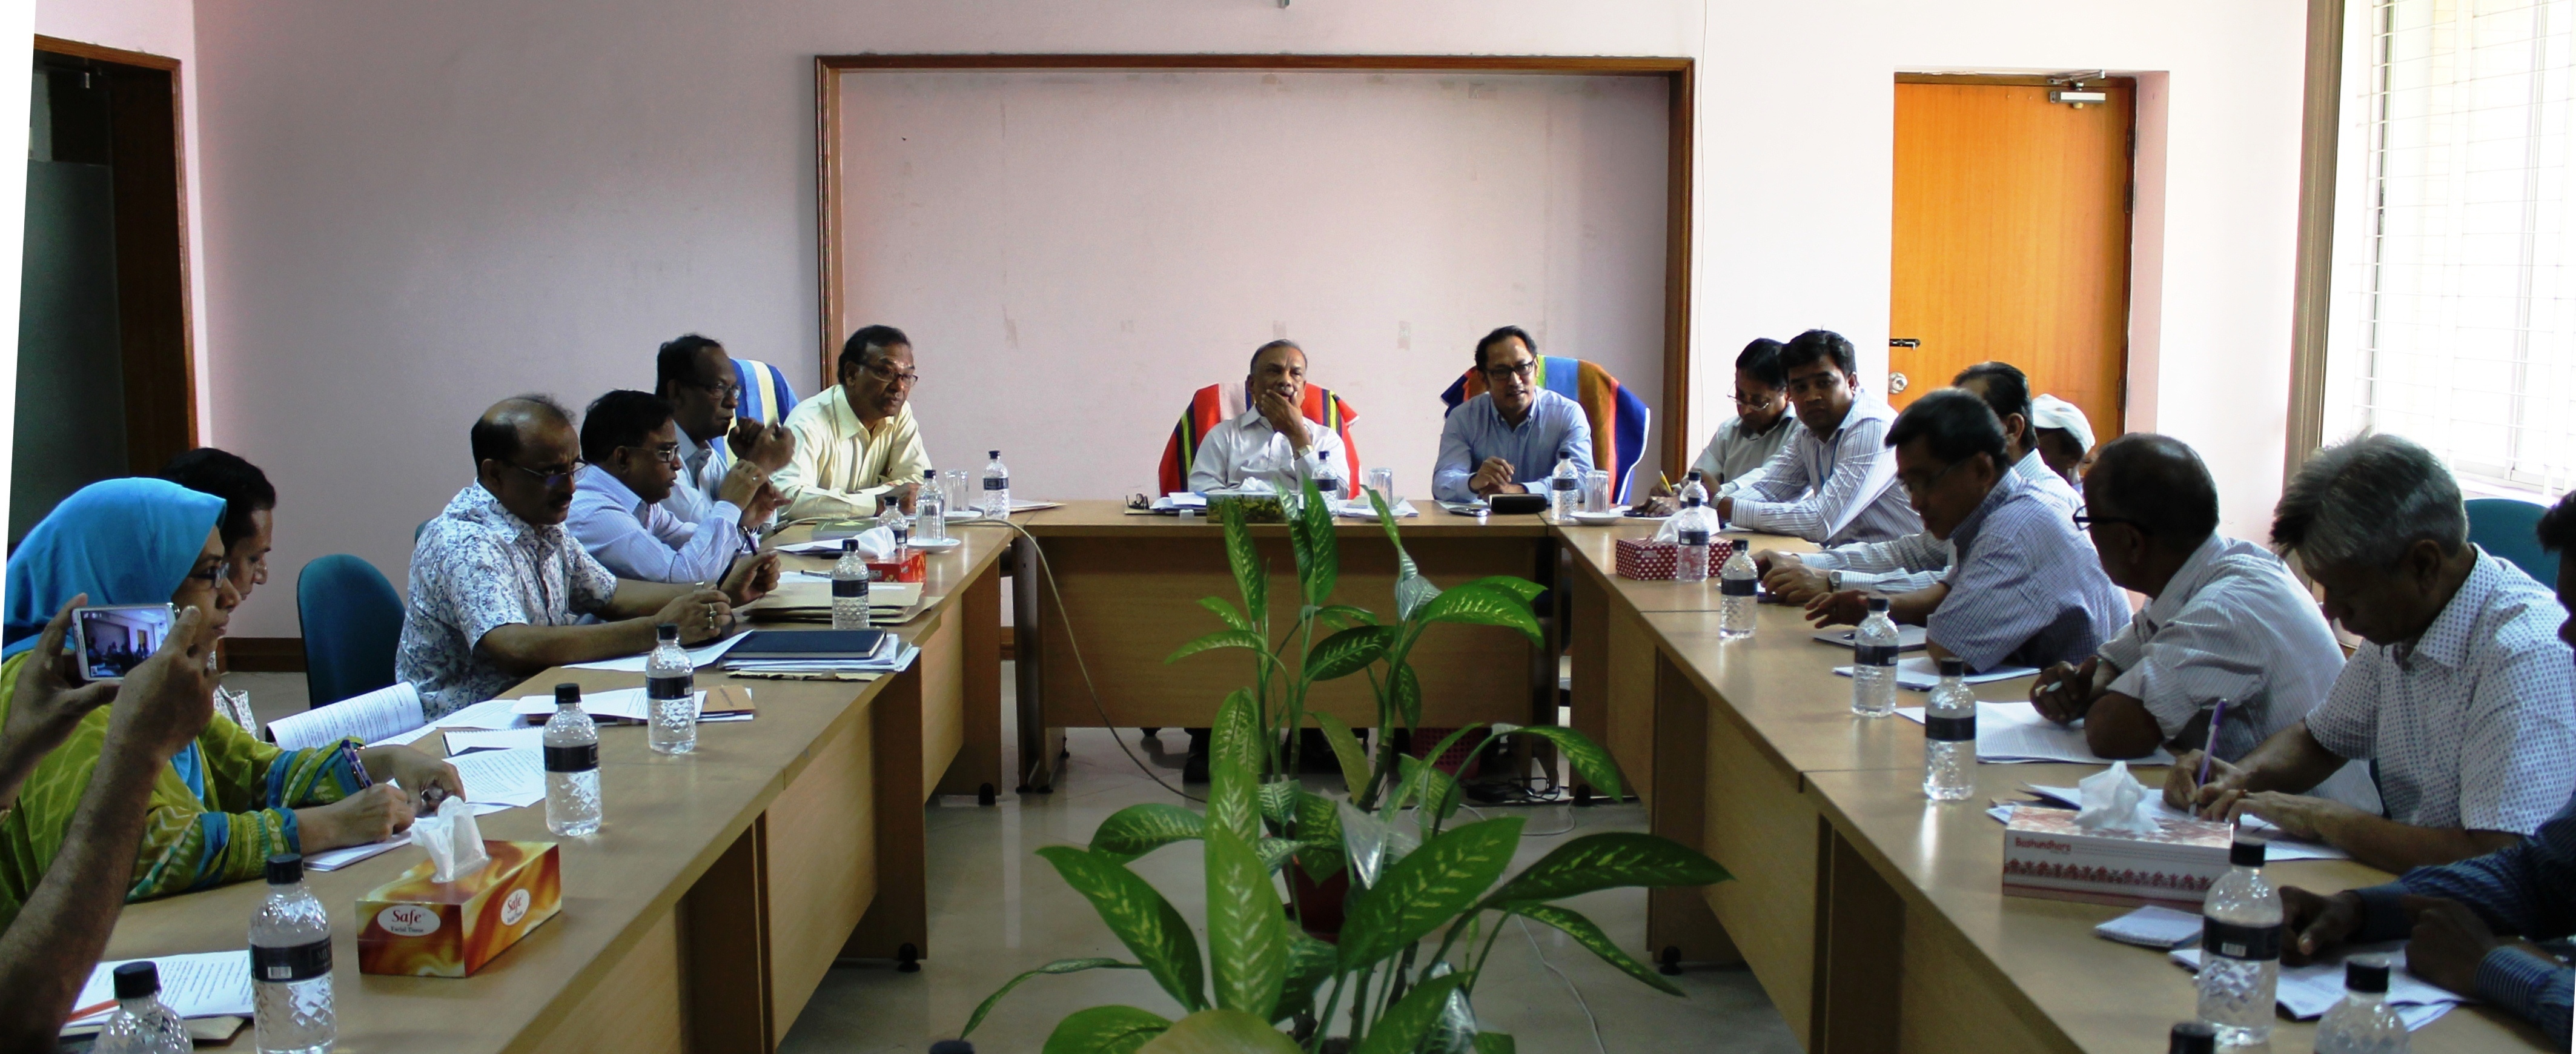 Meeting with the Official of Forest Department of Bangladesh and the representatives of BIPNet-CCBD held today: